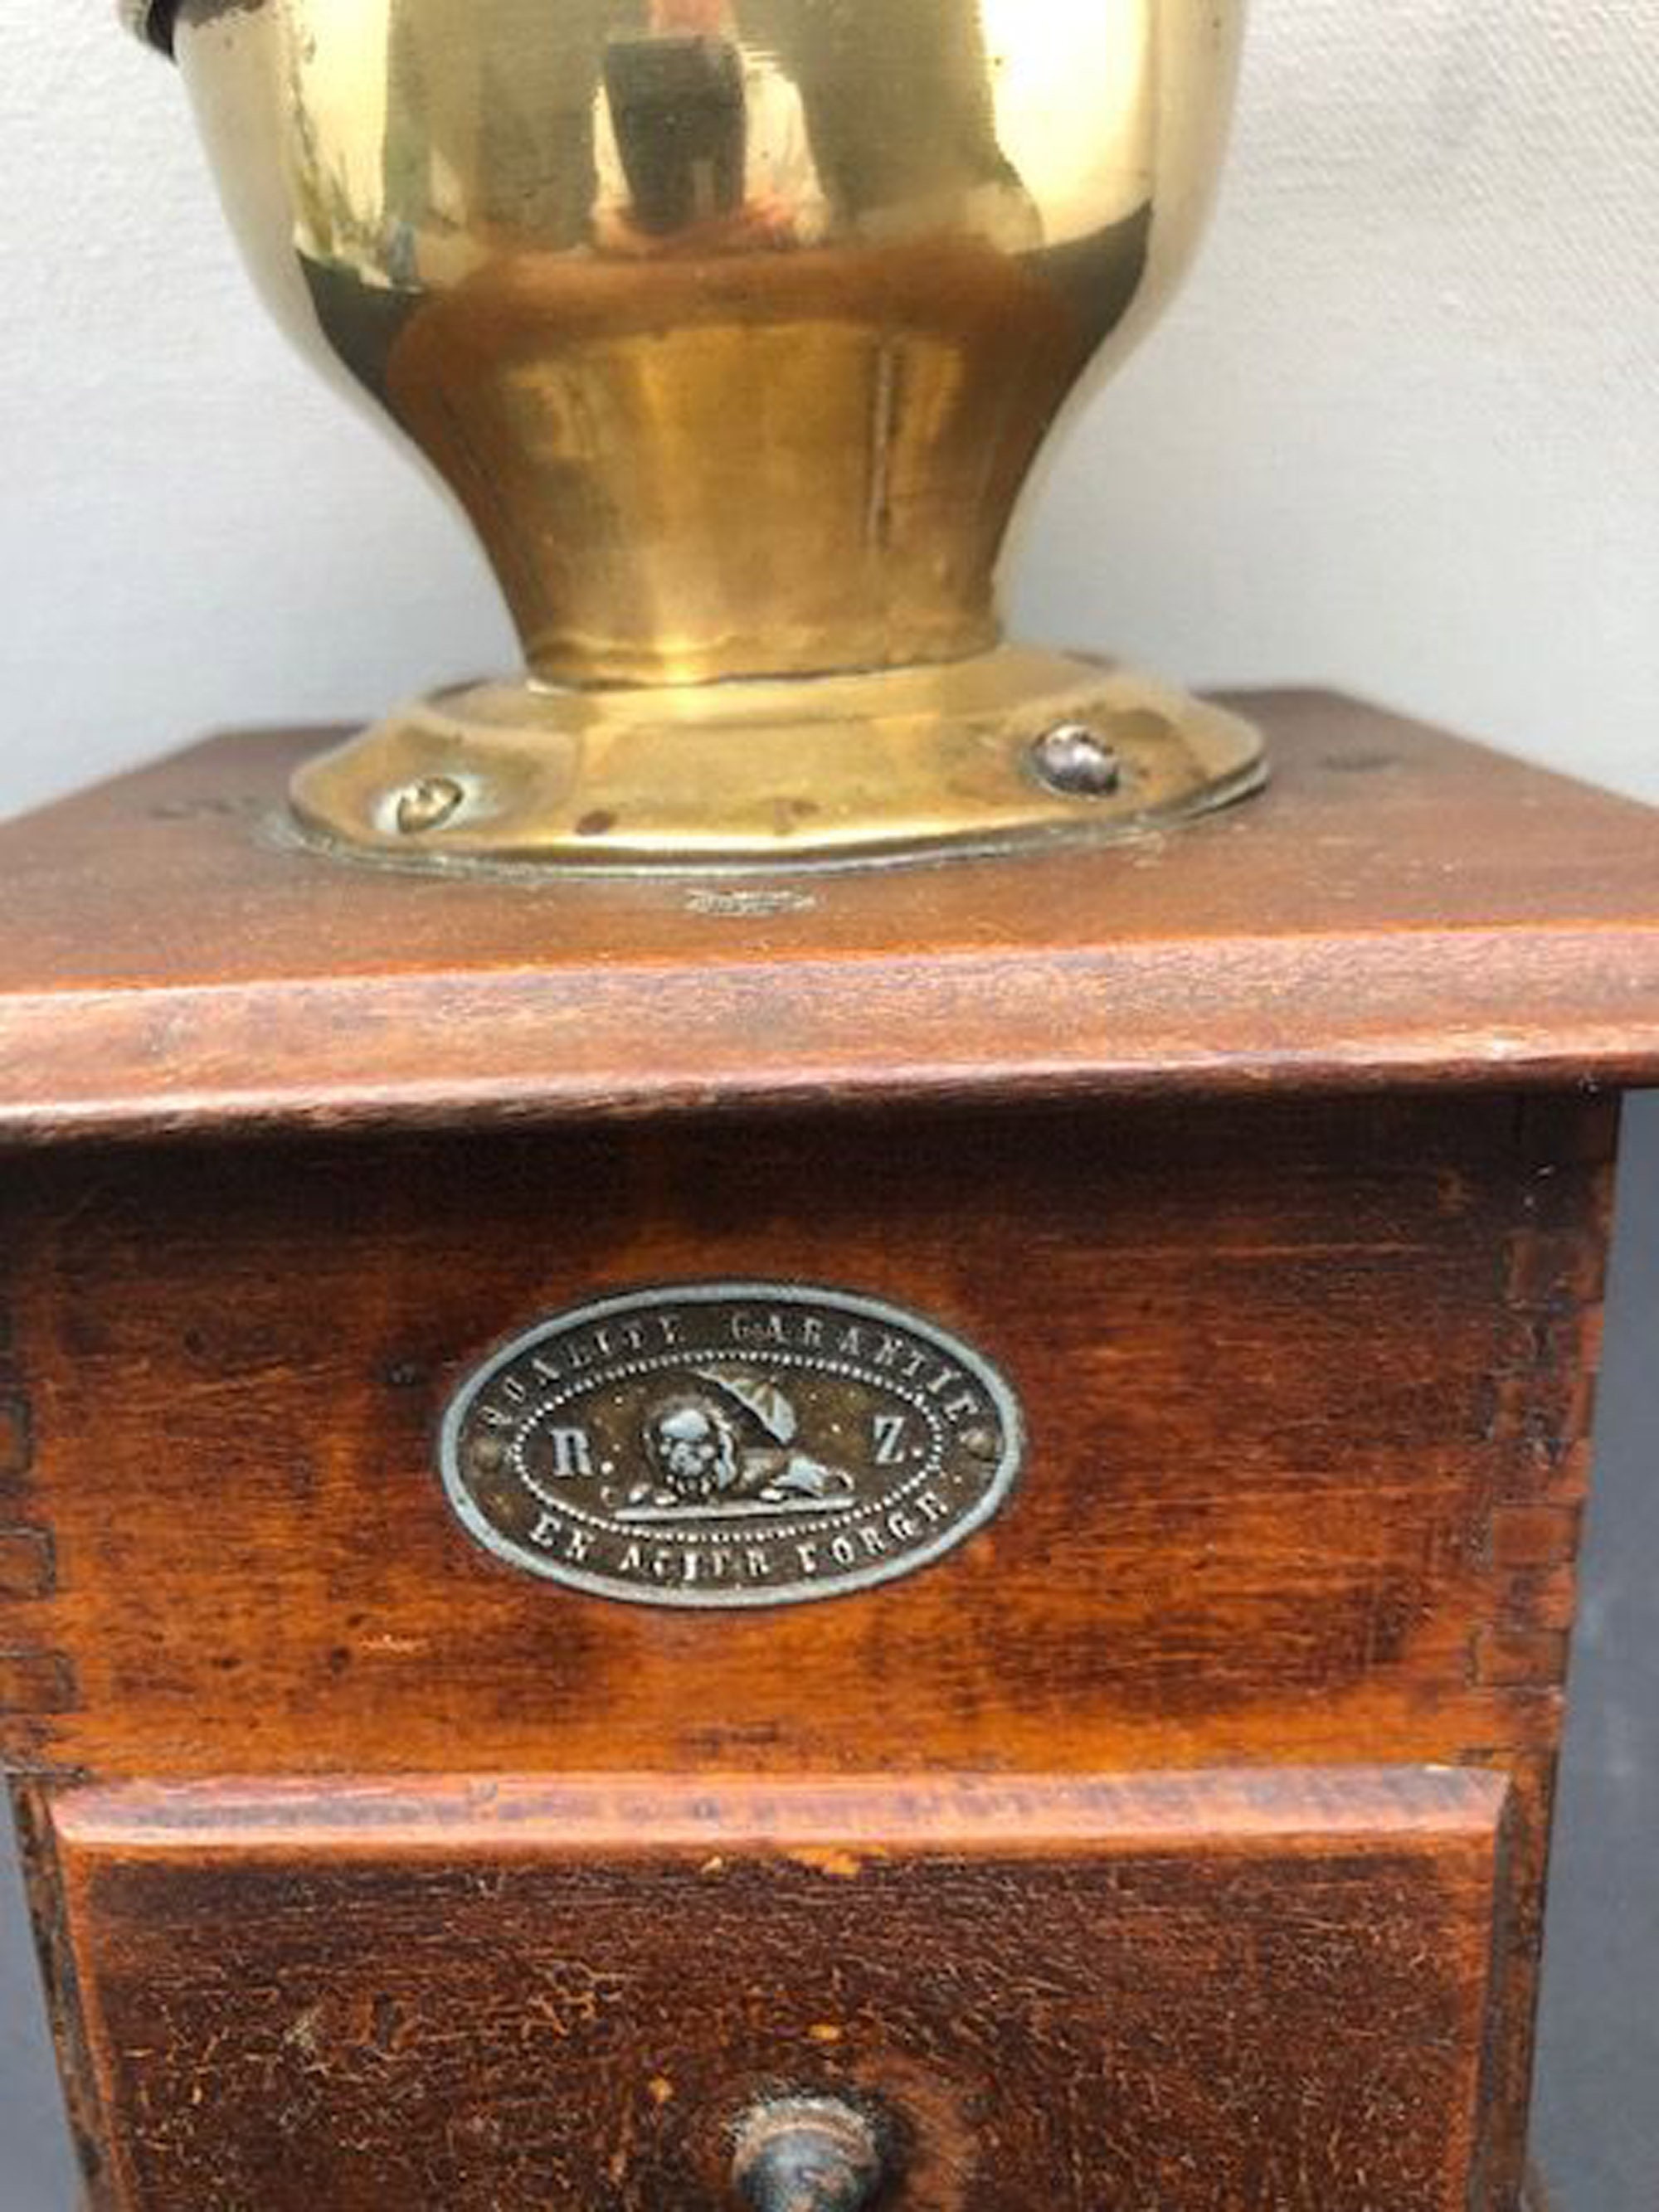 Sold at Auction: Wooden French one Drawer Coffee Grinder With Copper/Brass  Top